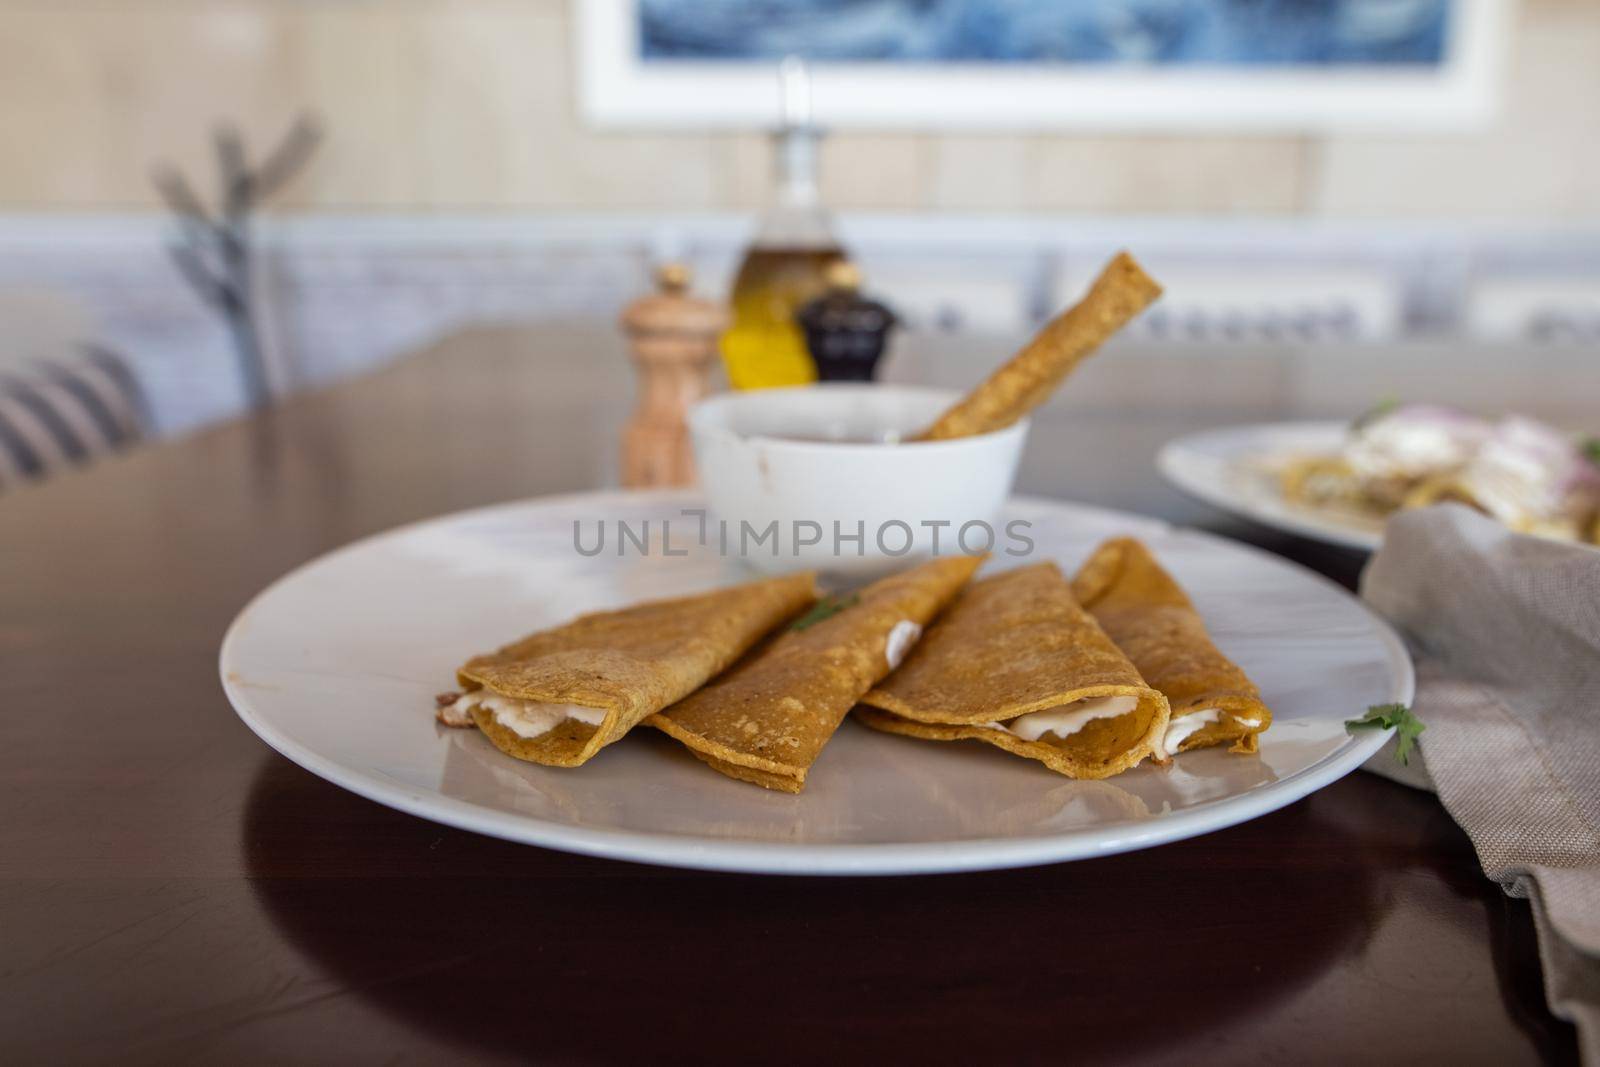 Close-up of plate with five delicious quesadillas and cup of beans on brown table with blurry background. Spices and authentic Hispanic snacks on wooden surface. Traditional Mexican cuisine